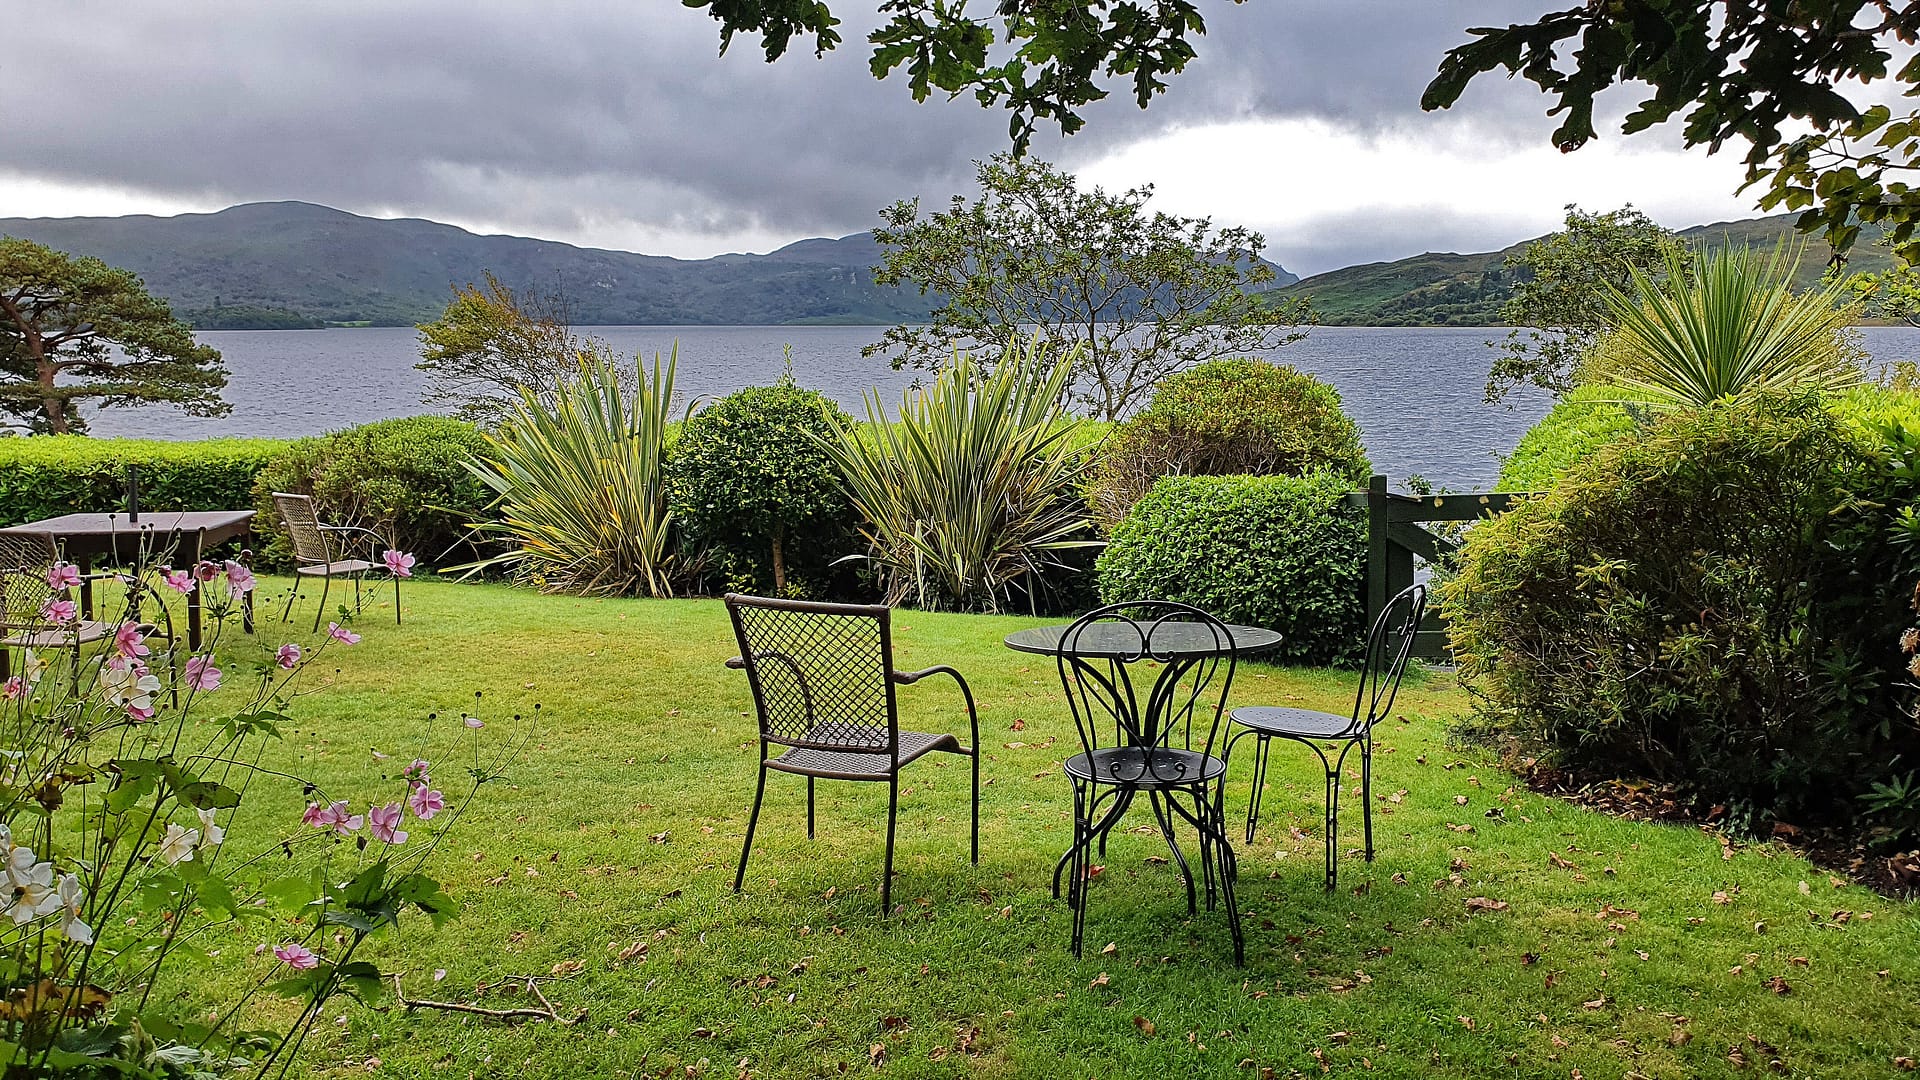 An inviting sitting area overlooking Caragh Lake